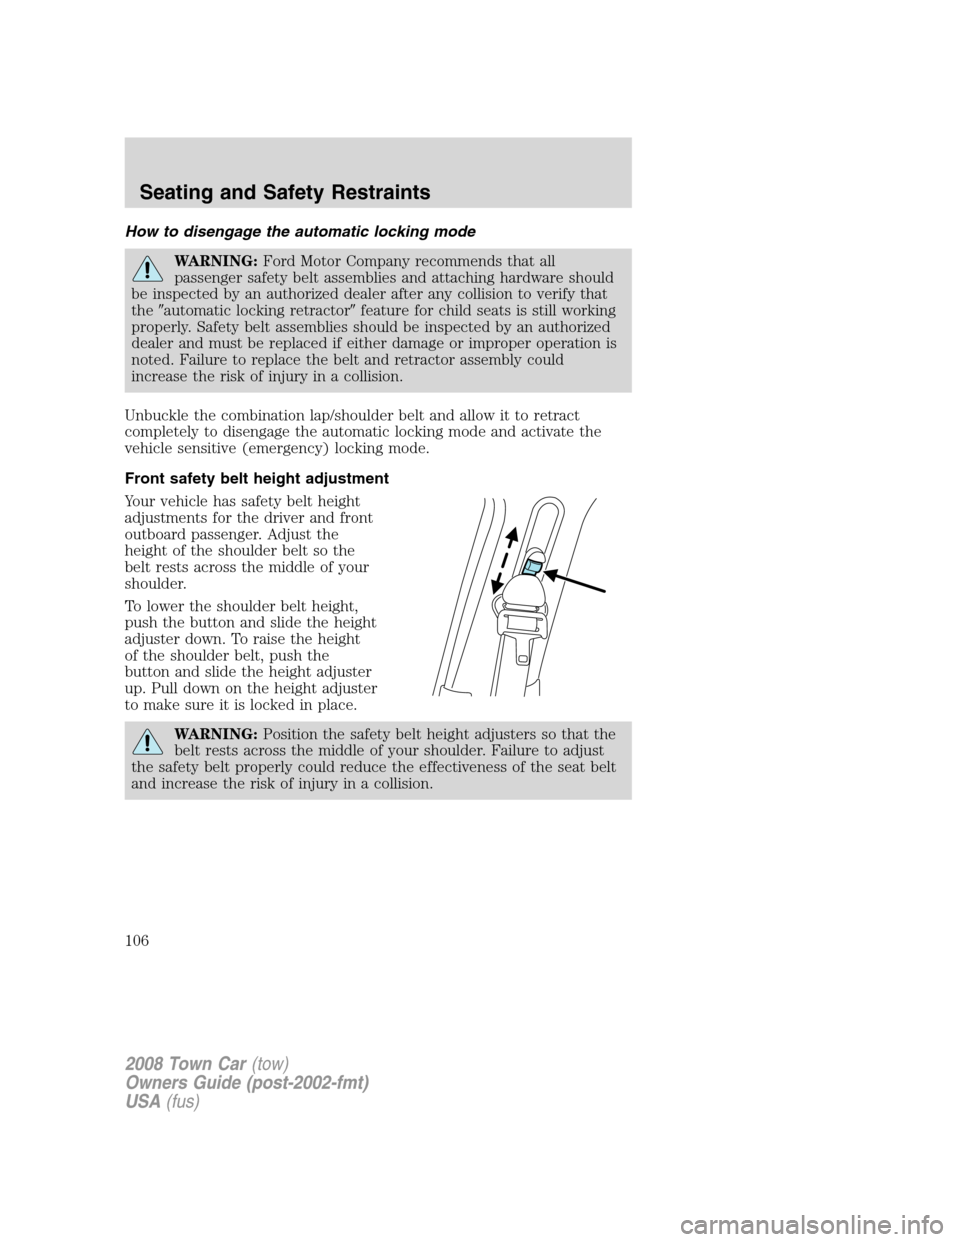 LINCOLN TOWN CAR 2008 Service Manual How to disengage the automatic locking mode
WARNING:Ford Motor Company recommends that all
passenger safety belt assemblies and attaching hardware should
be inspected by an authorized dealer after any